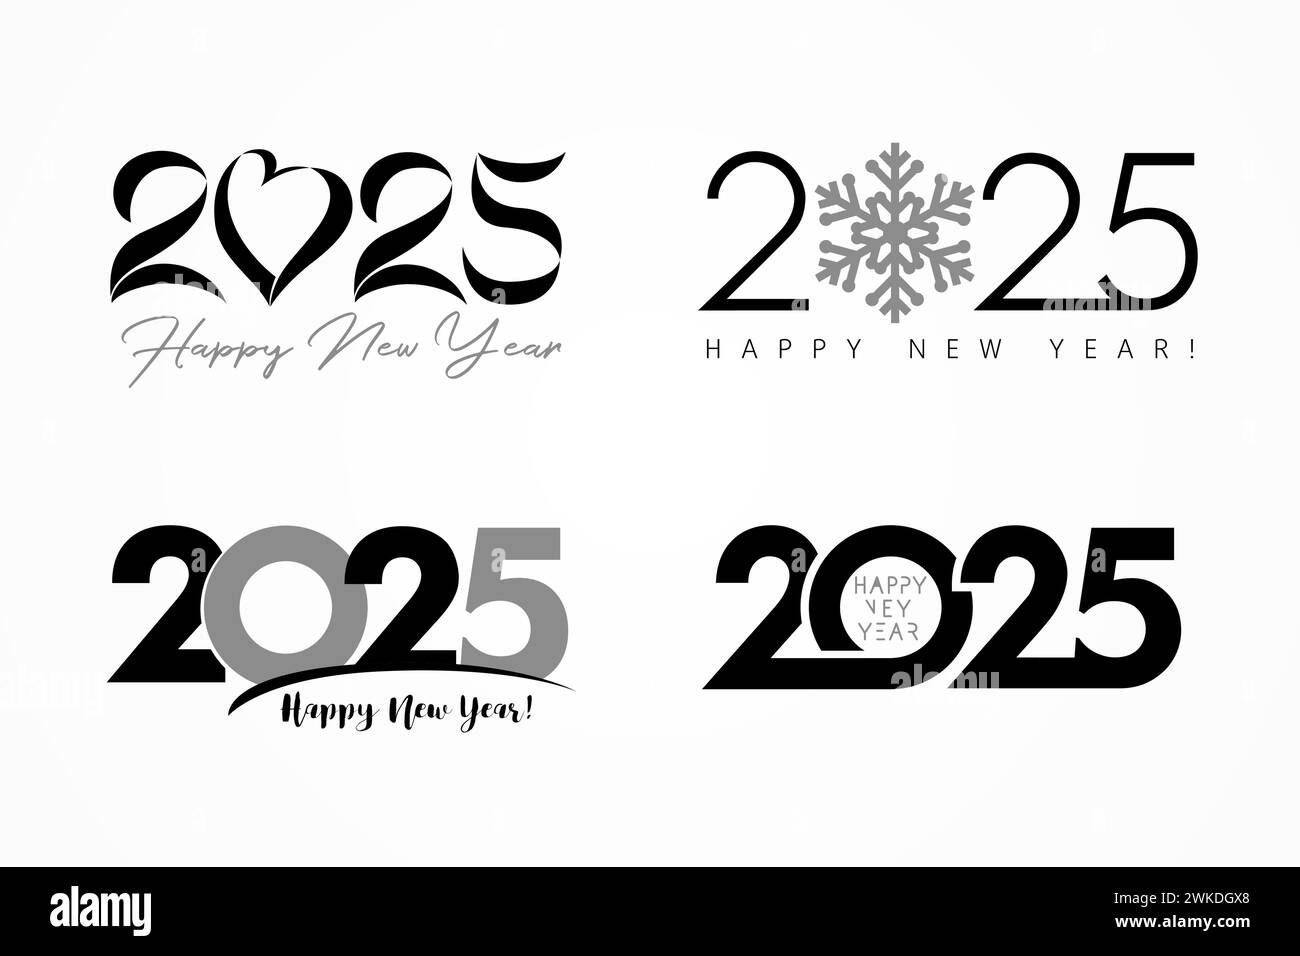 Big set of 2025 logos, text design with heart, snow and simple symbols. Happy New Year 2025, business concept for calendar cover or greeting card Stock Vector